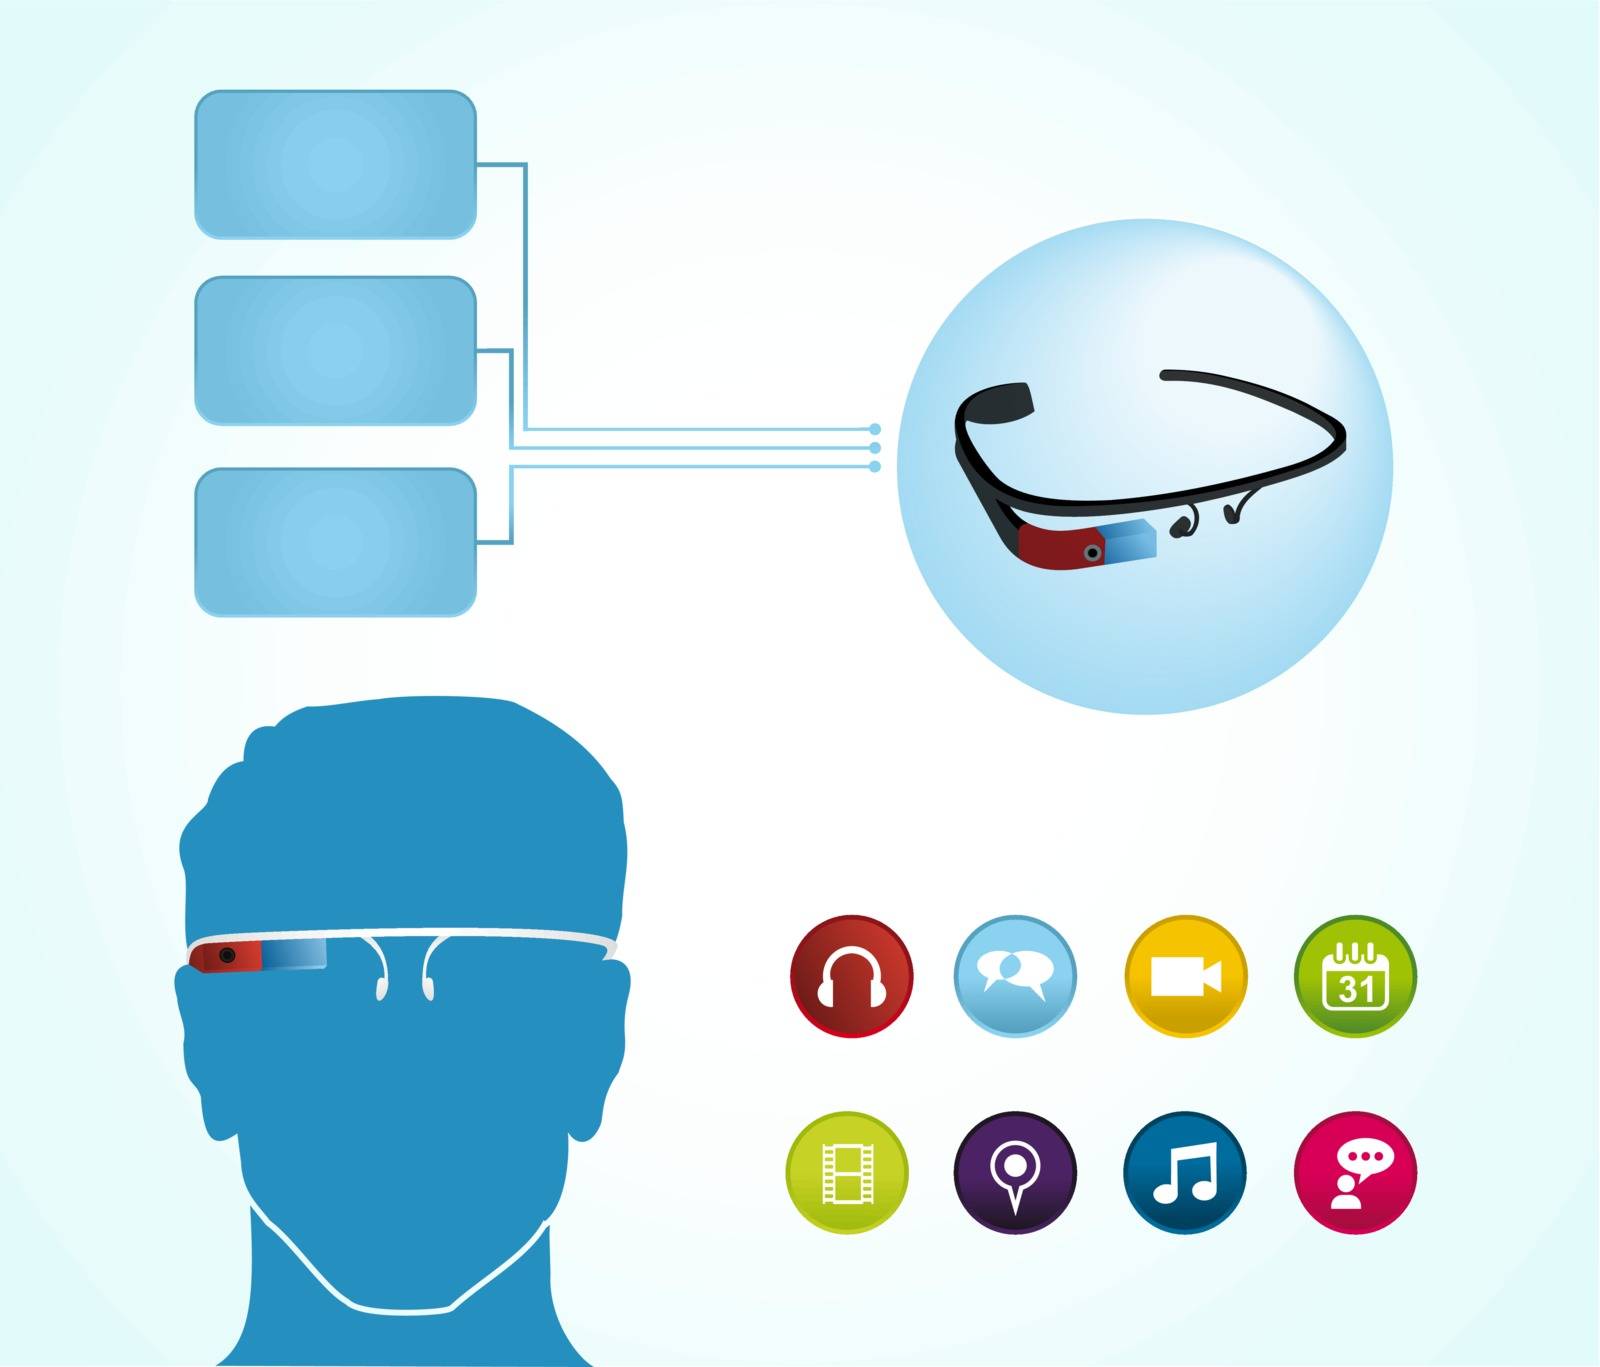 Smart glasses infographic with apps icons set concept illustration. EPS10 vector file organized in layers for easy editing.